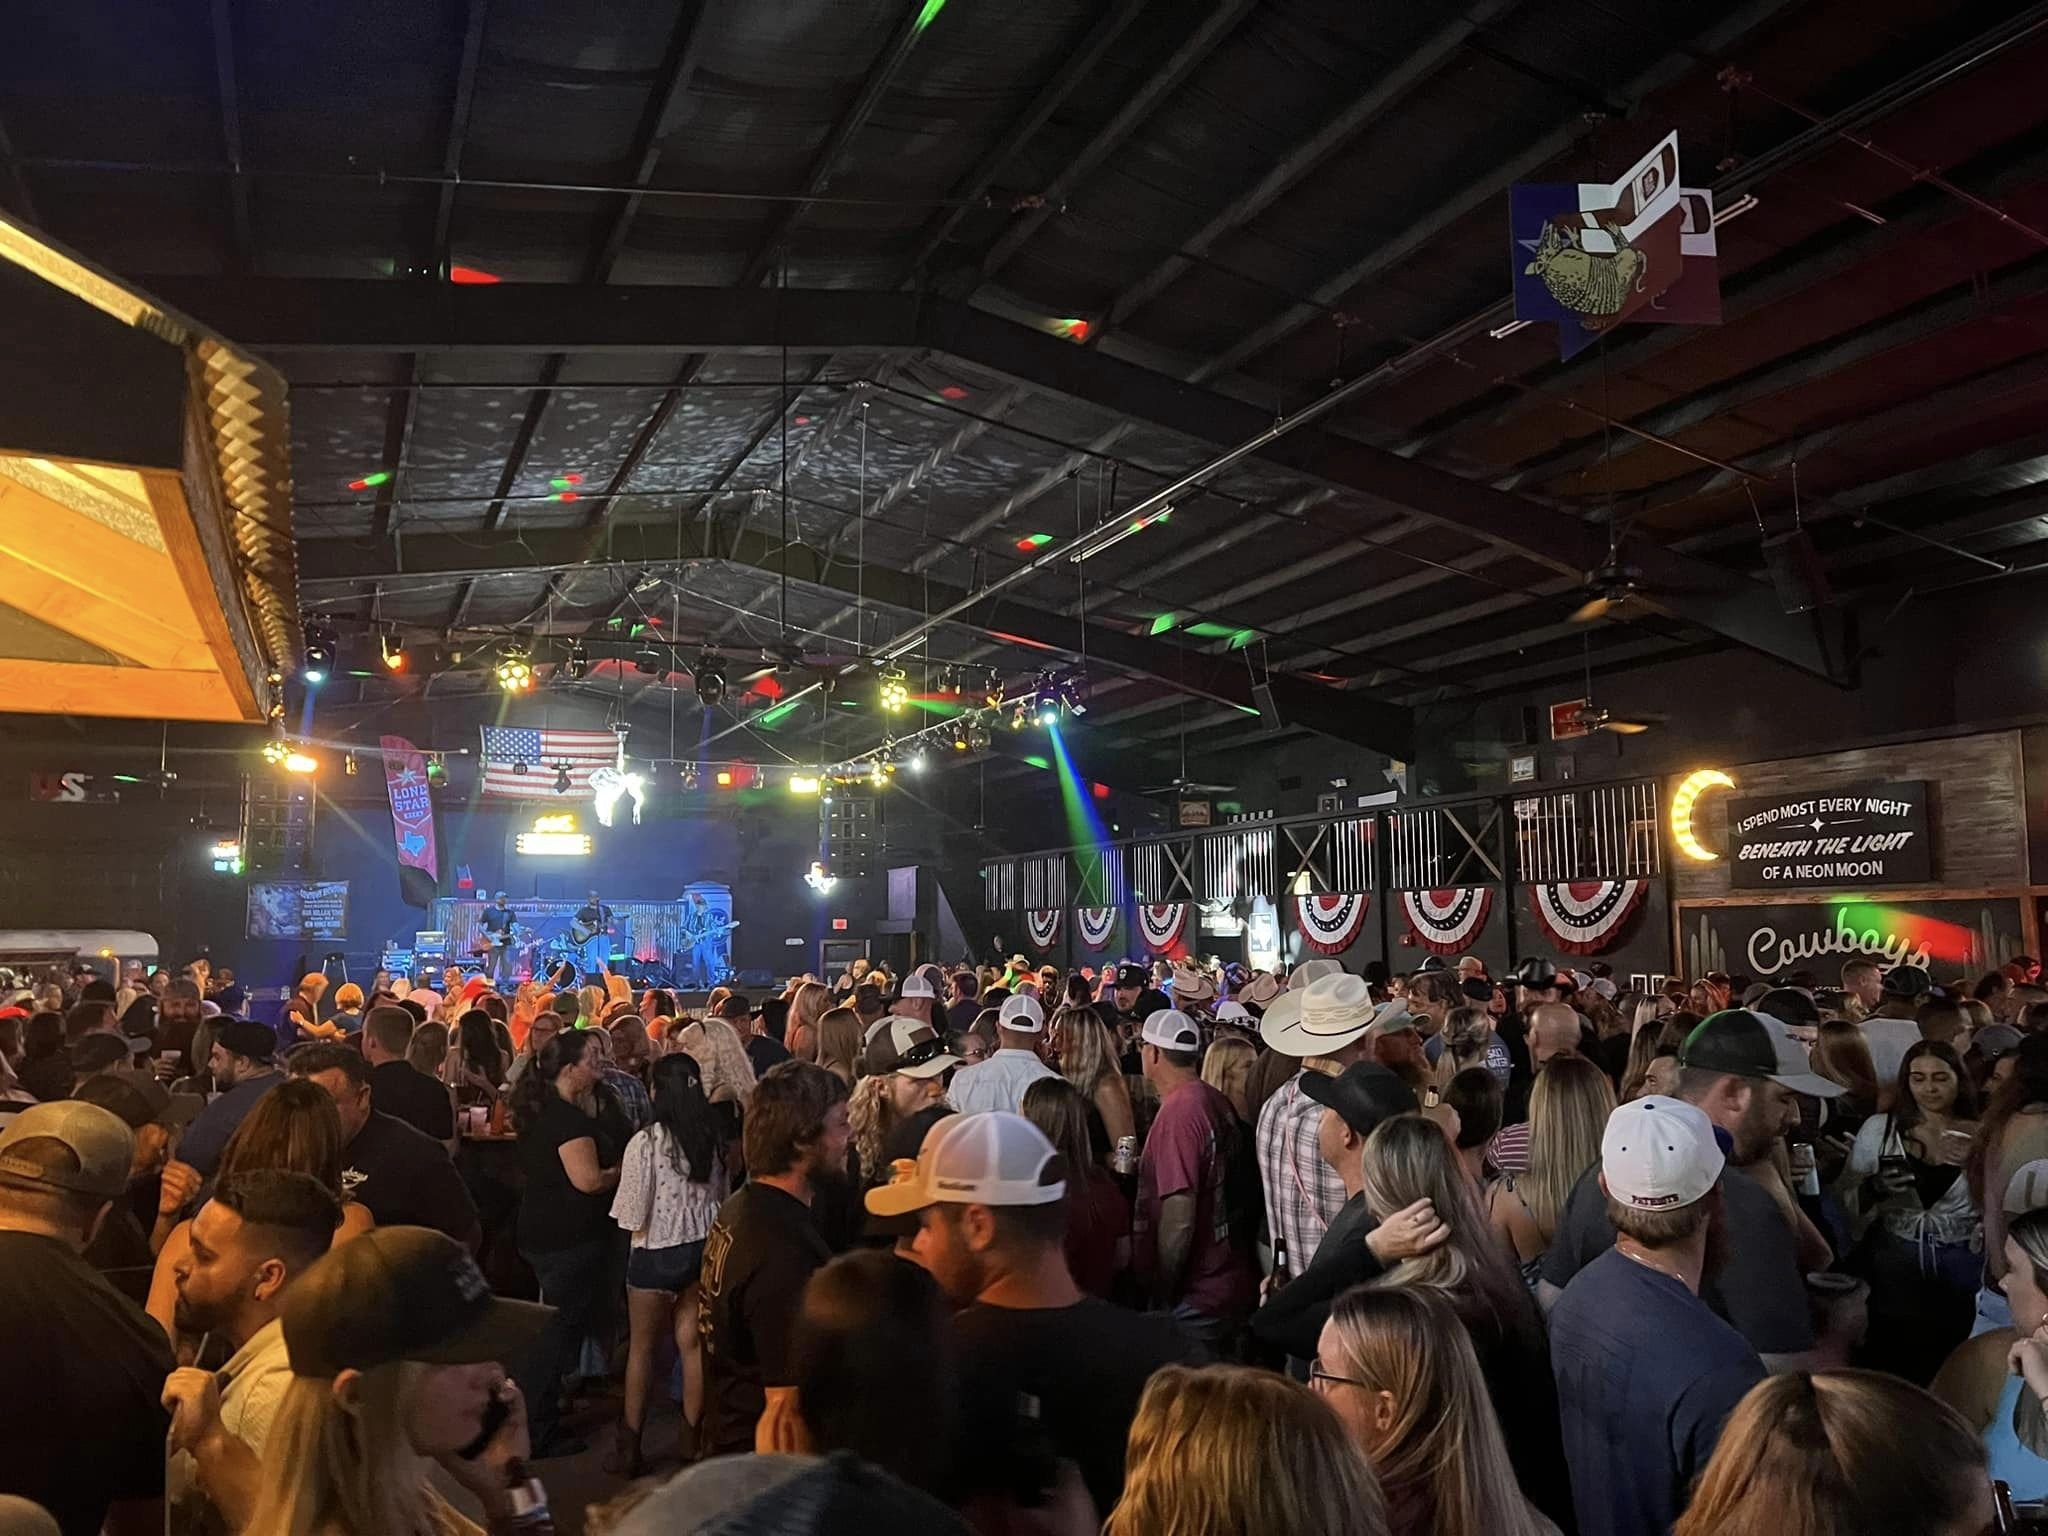 Country music bar Cowboys Dance Hall opens in Largo